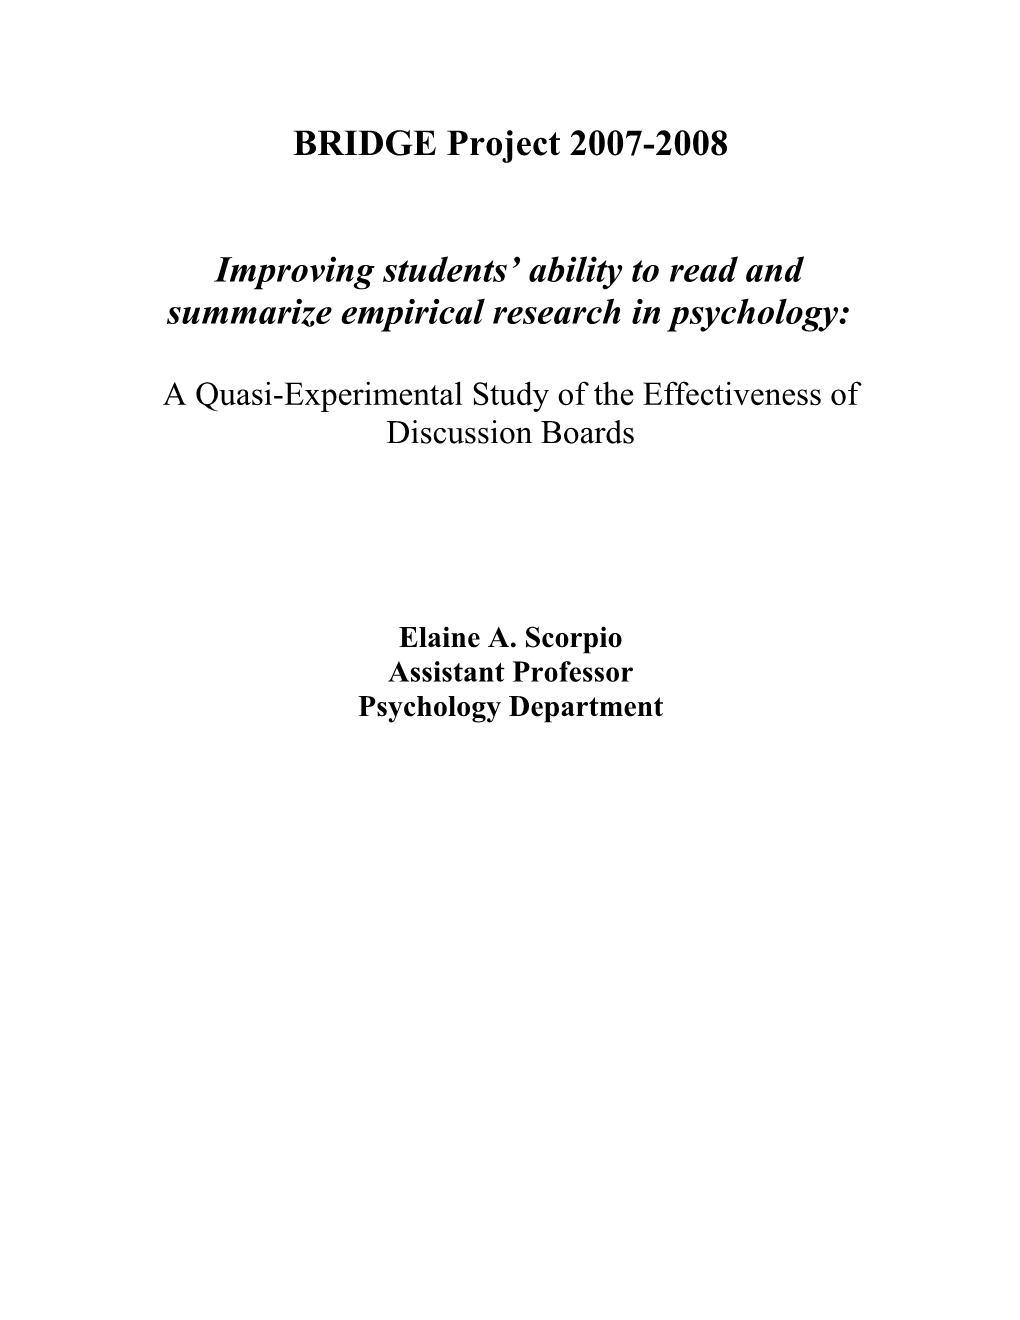 Improving Students Ability to Read and Summarize Empirical Research in Psychology